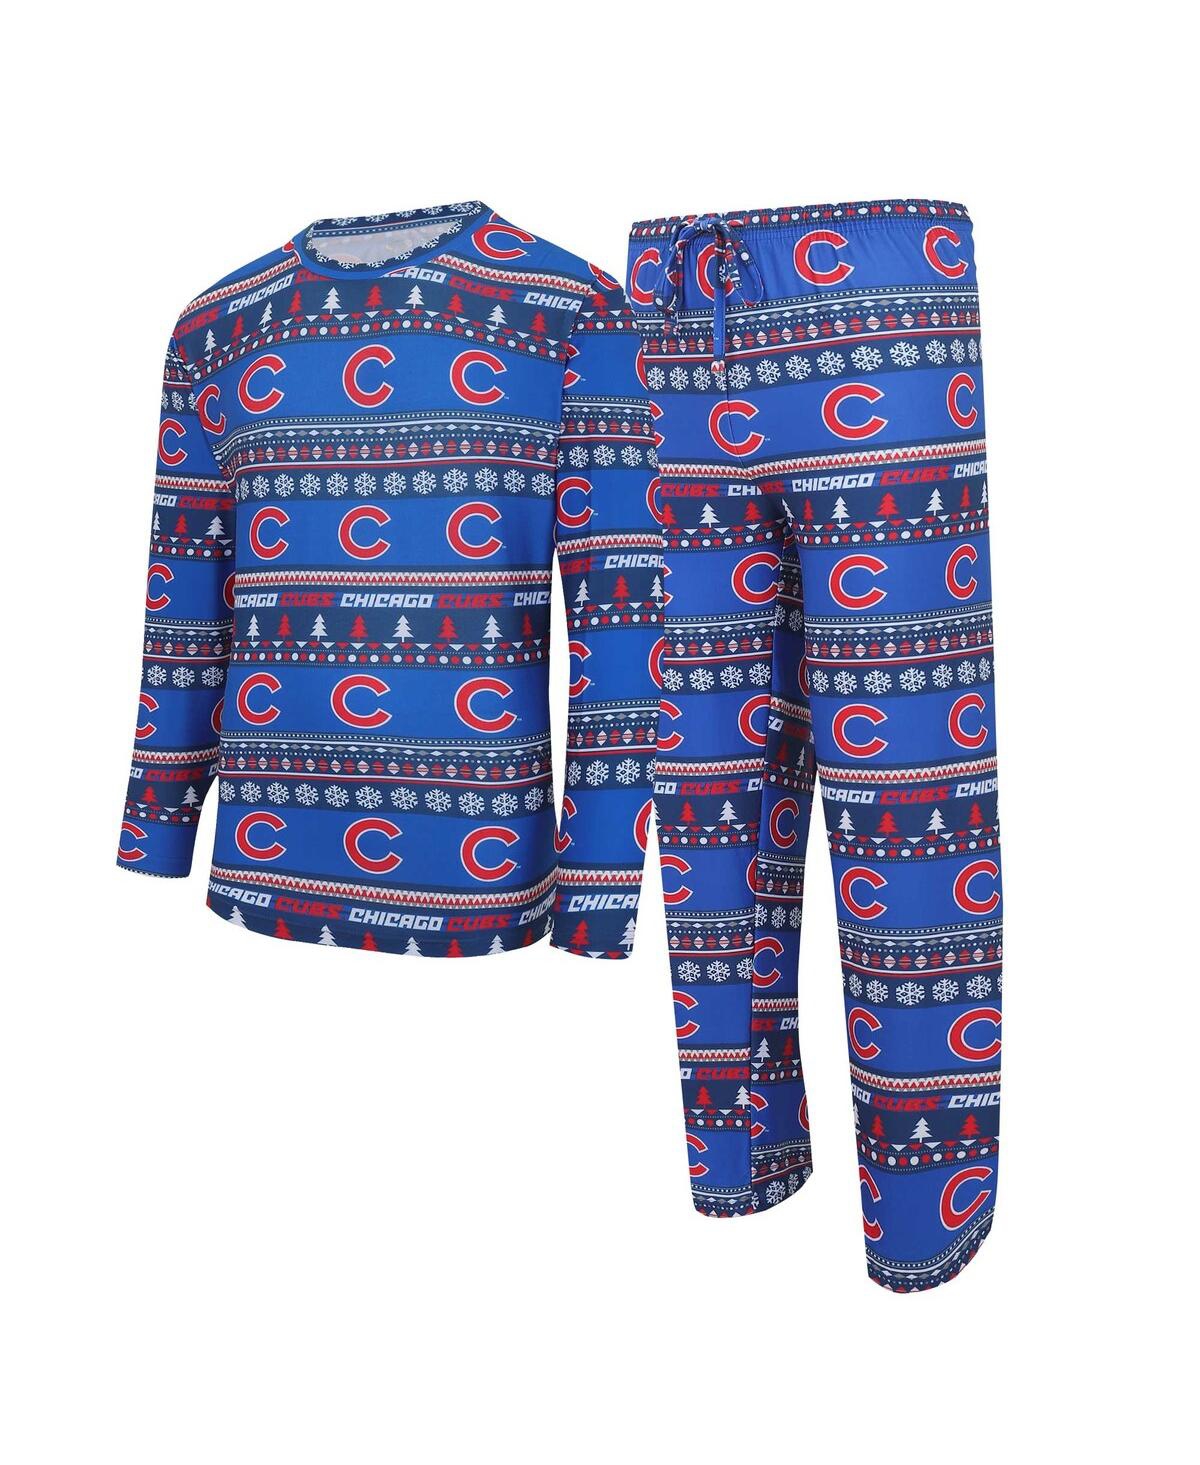 Men's Concepts Sport Royal Chicago Cubs Knit Ugly Sweater Long Sleeve Top and Pants Set - Royal